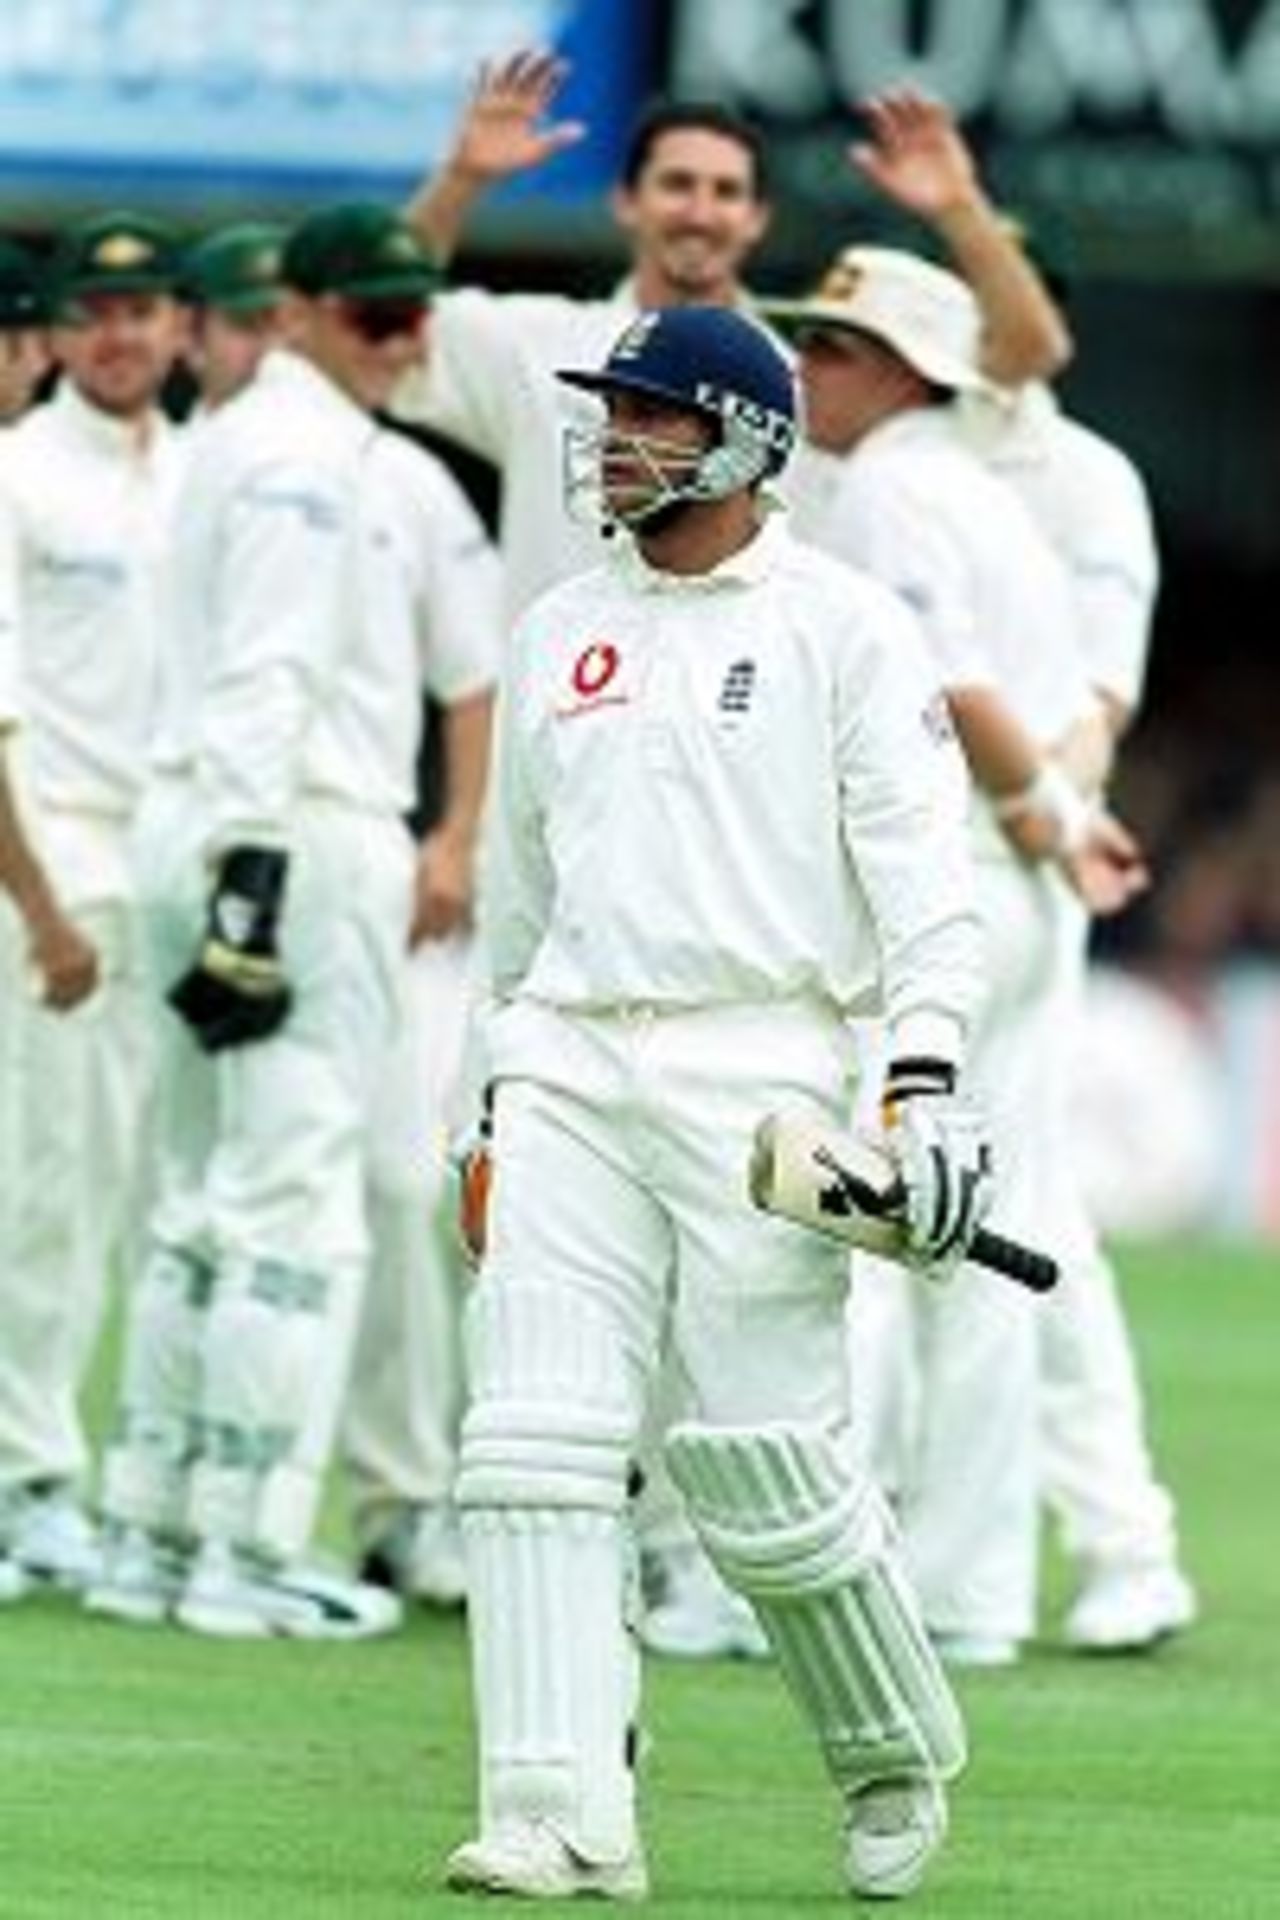 A dejected Mark Butcher of England heads back to the pavilion after losing his wicket to Jason Gillespie of Australia during the fourth day of the Second Npower Test between England and Australia at Lord's, London.